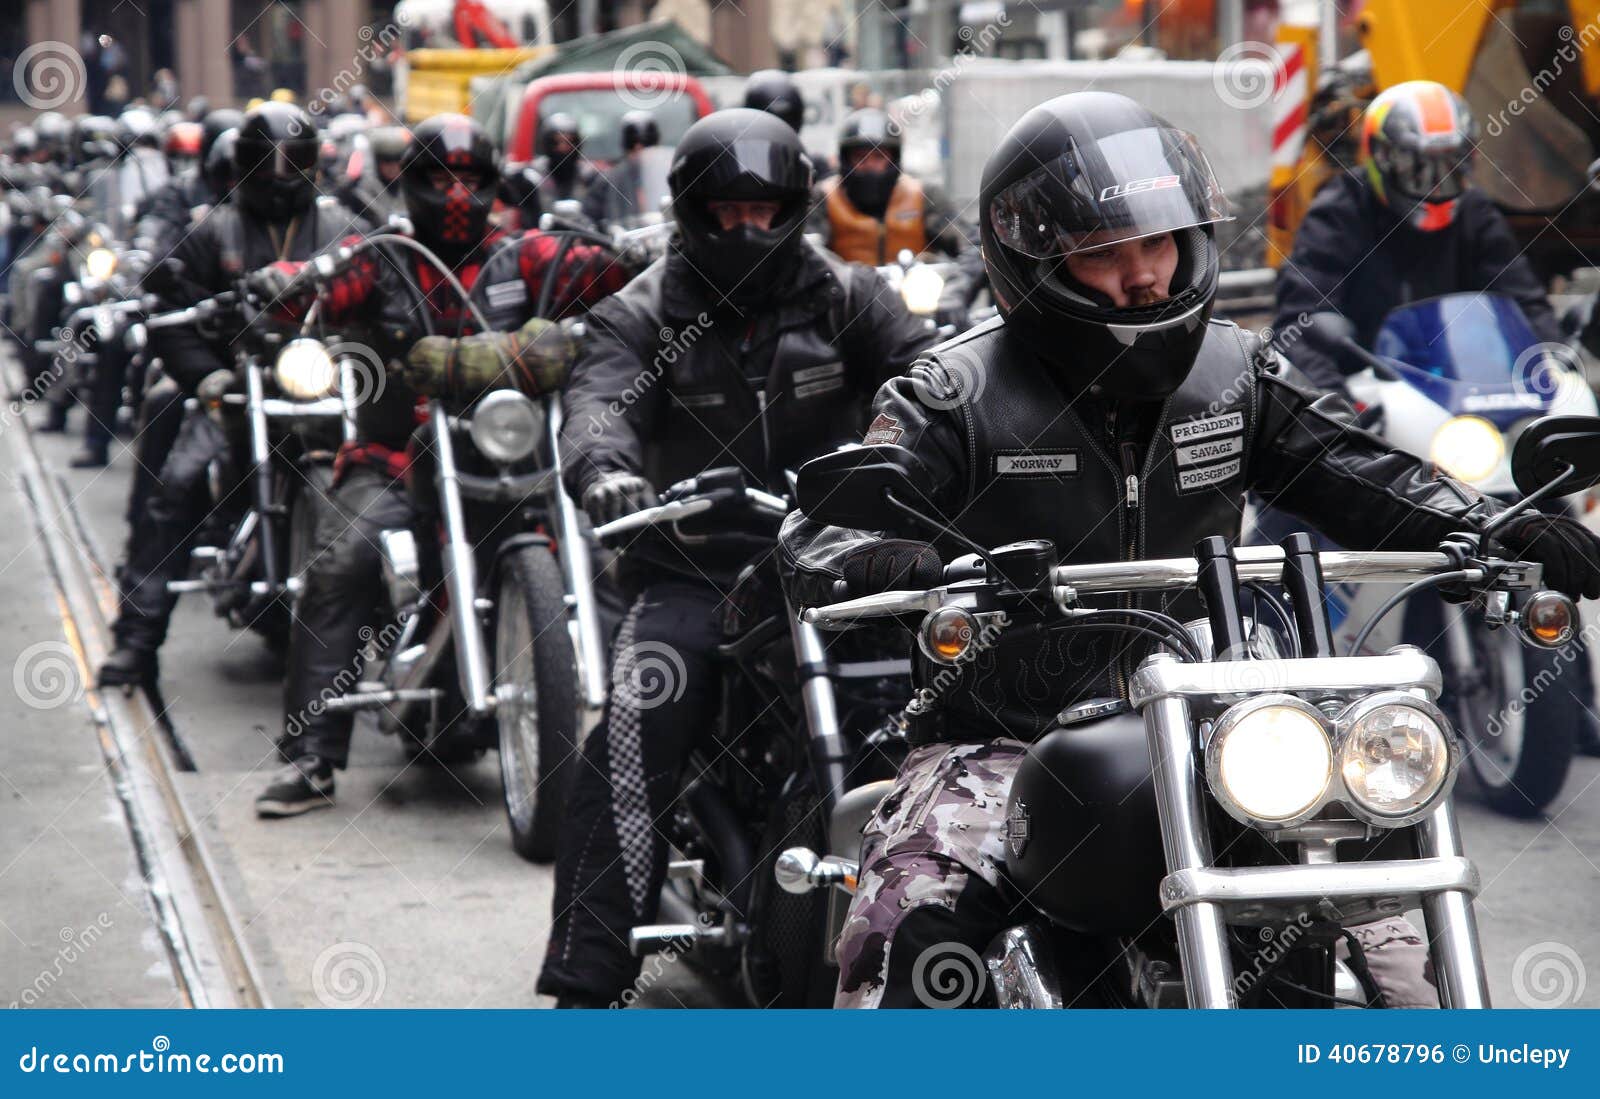 Protest of Motorcycle Clubs. Oslo. Editorial Photo - Image of crime,  engine: 40678796